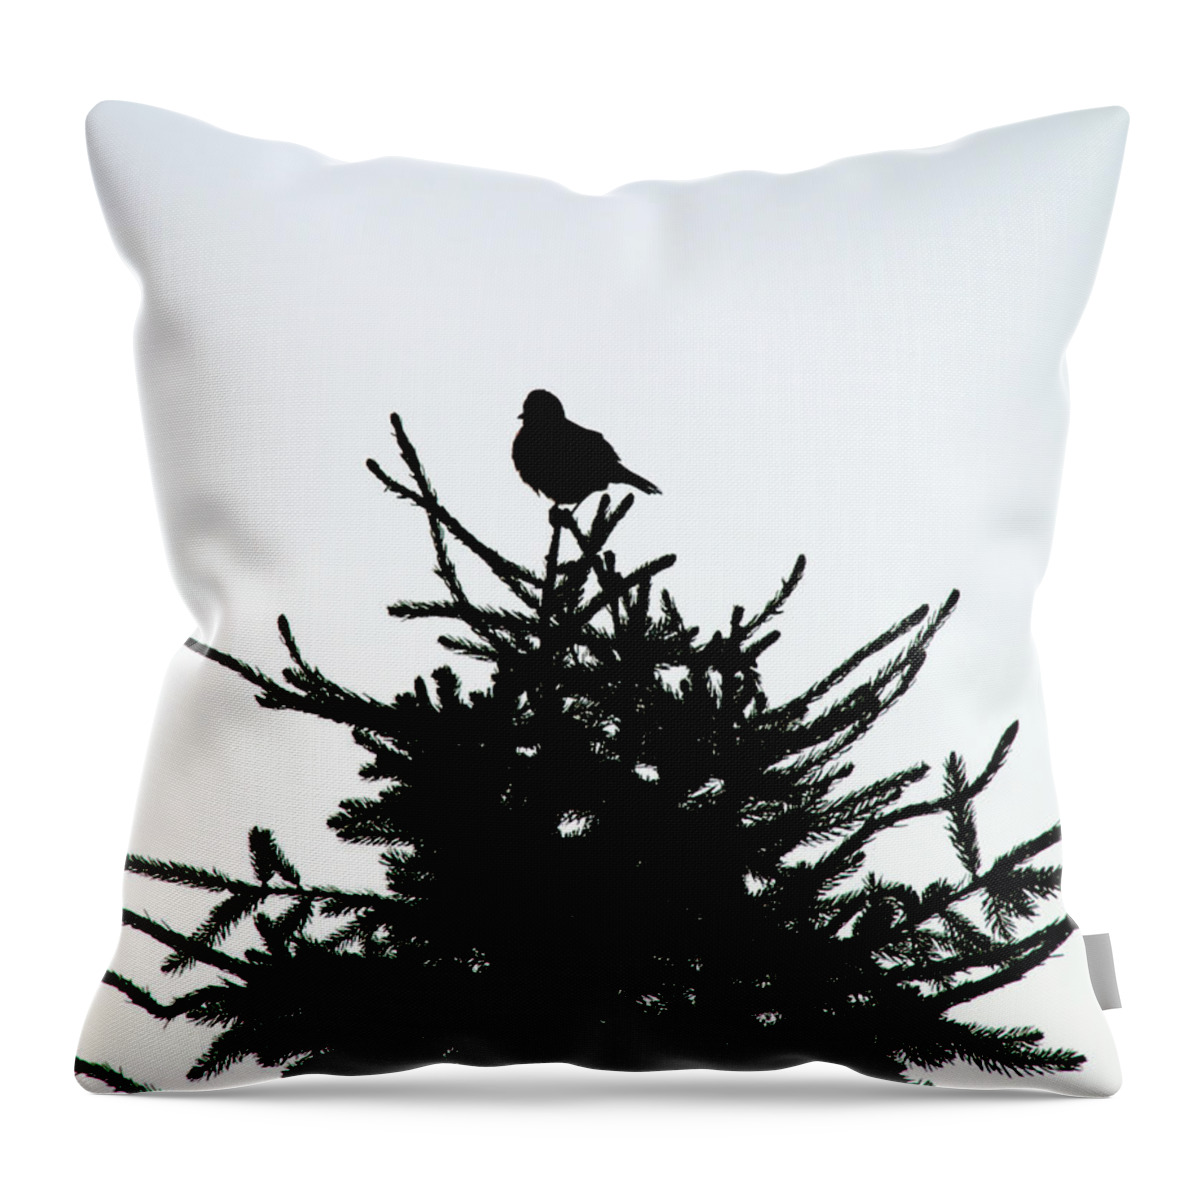 Silhouette Throw Pillow featuring the photograph Bird Silhouette by Mark Dodd